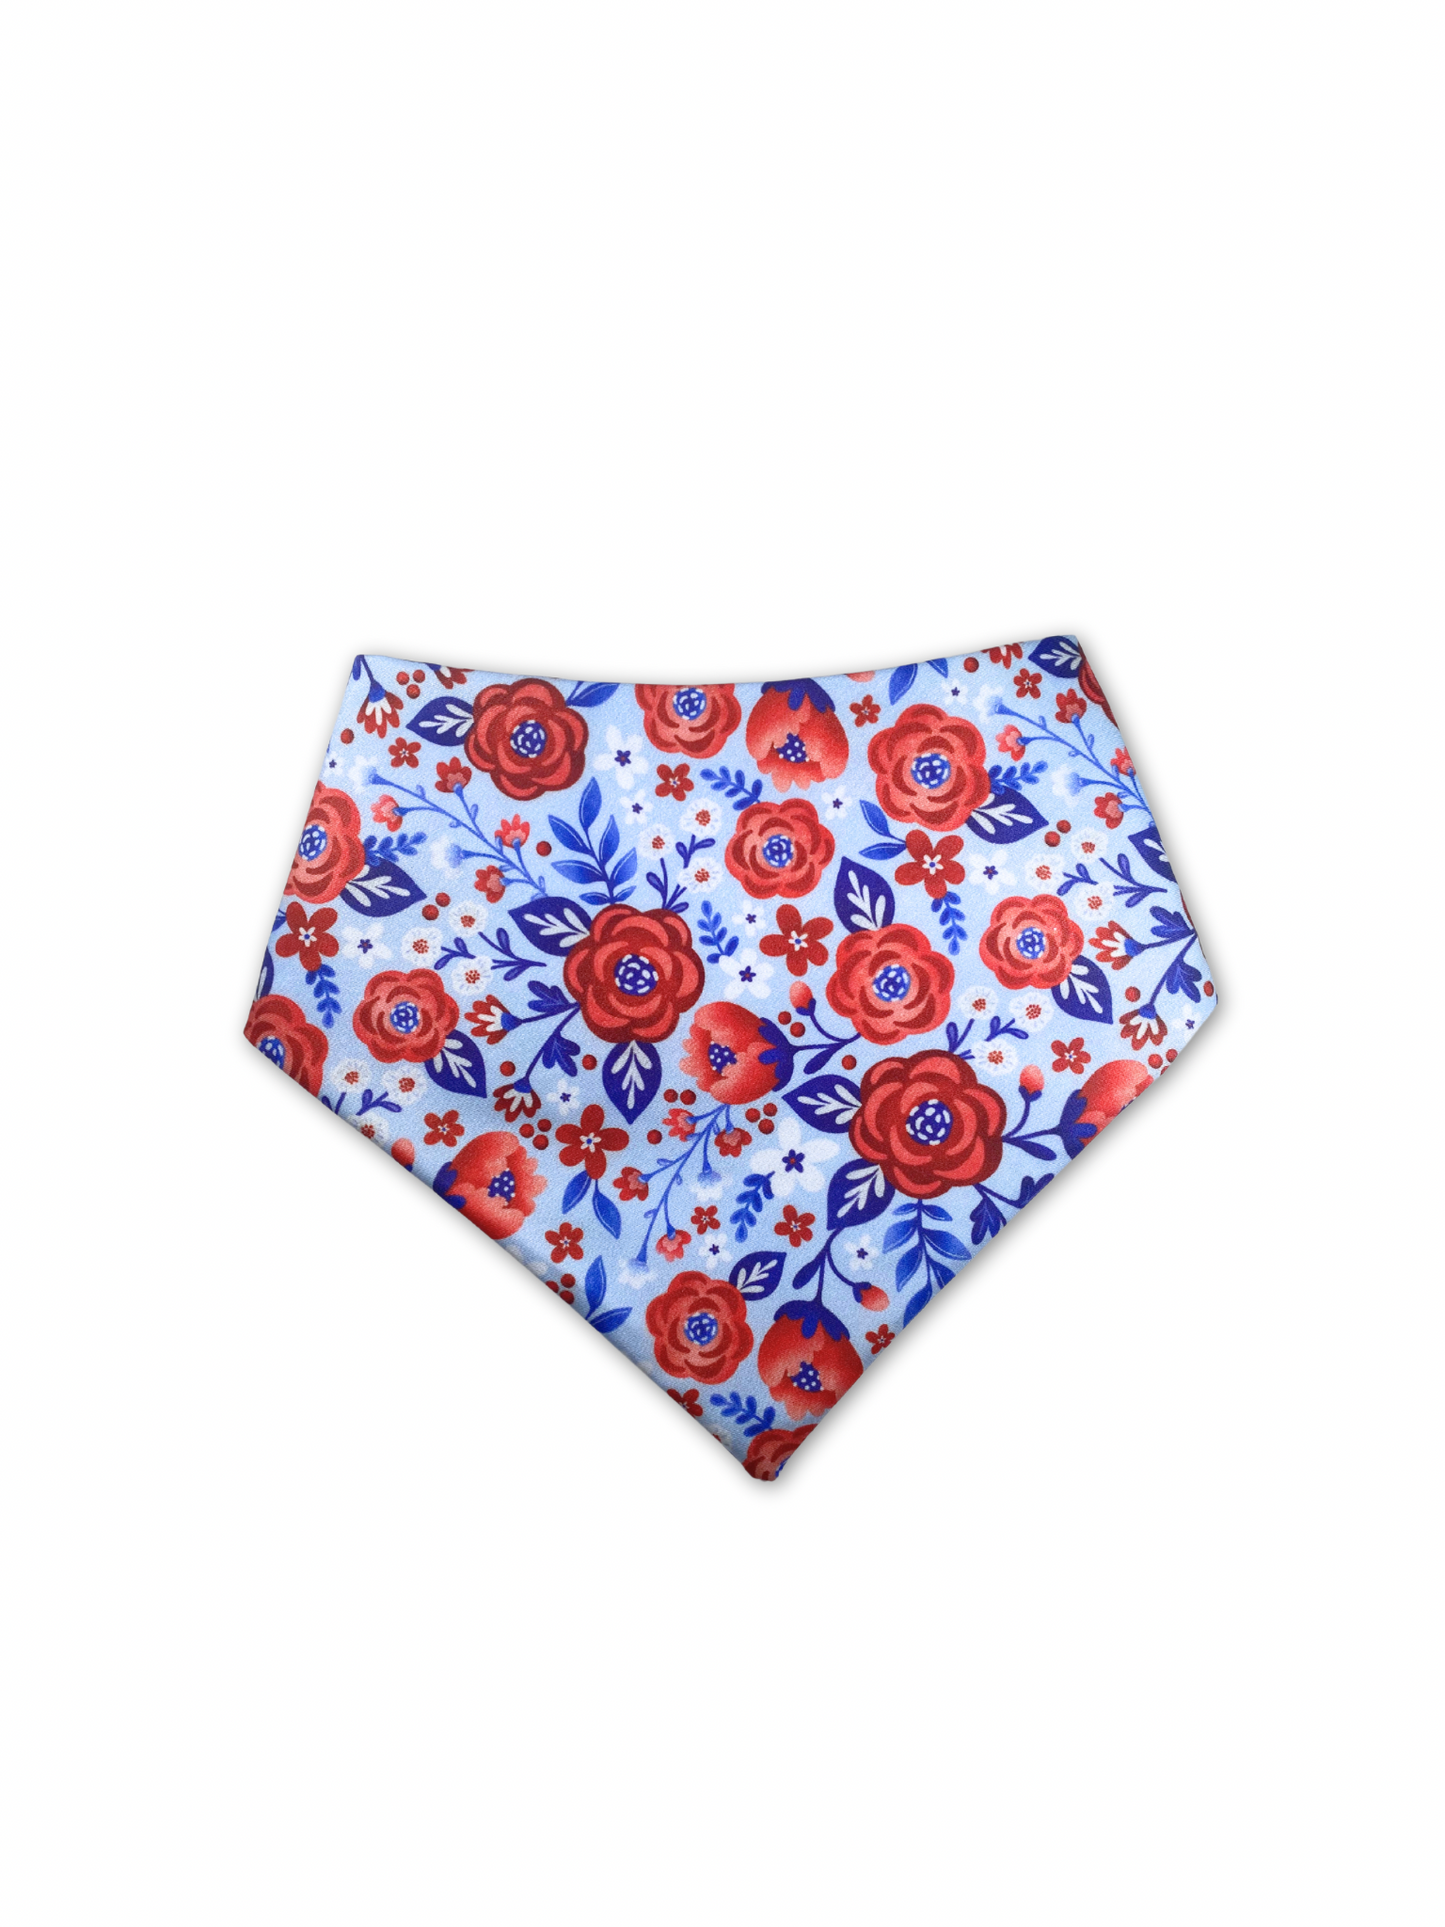 Memorial Day floral dog bandana, featuring a vibrant print with red, white, and blue blooms. This bandana is the perfect way to add a touch of patriotic style to your pup's wardrobe and celebrate the holiday in style.